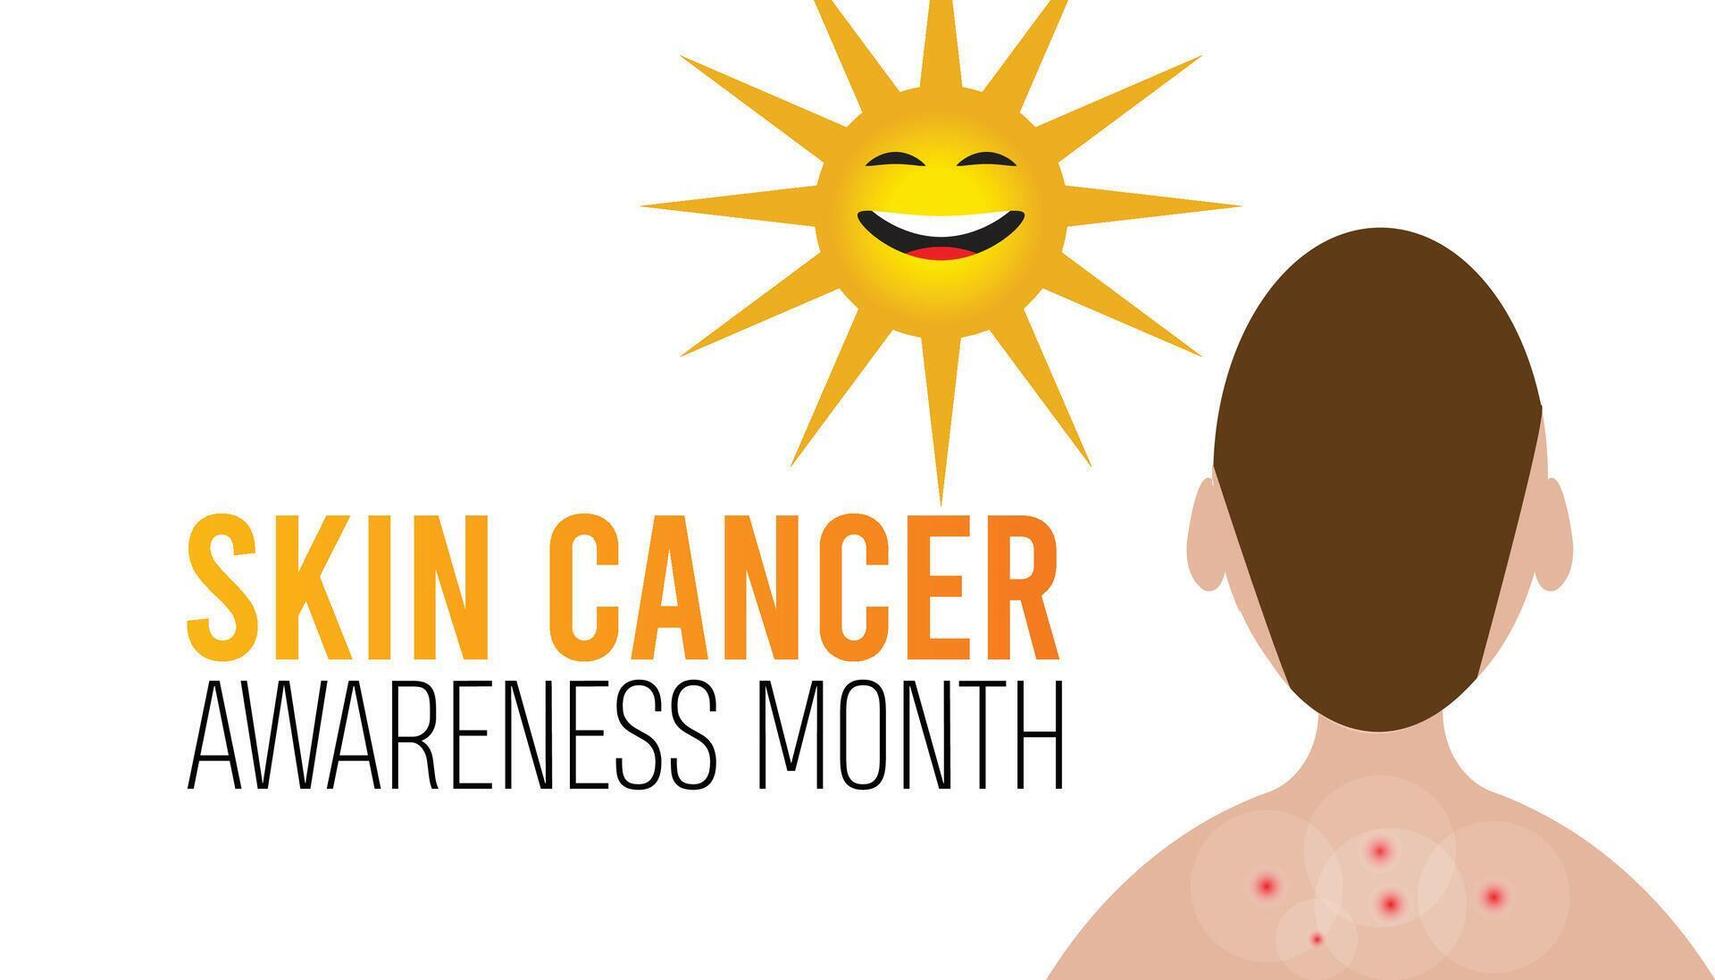 Skin Cancer Prevention and Awareness Month observed every year in May. Template for background, banner, card, poster with text inscription. vector